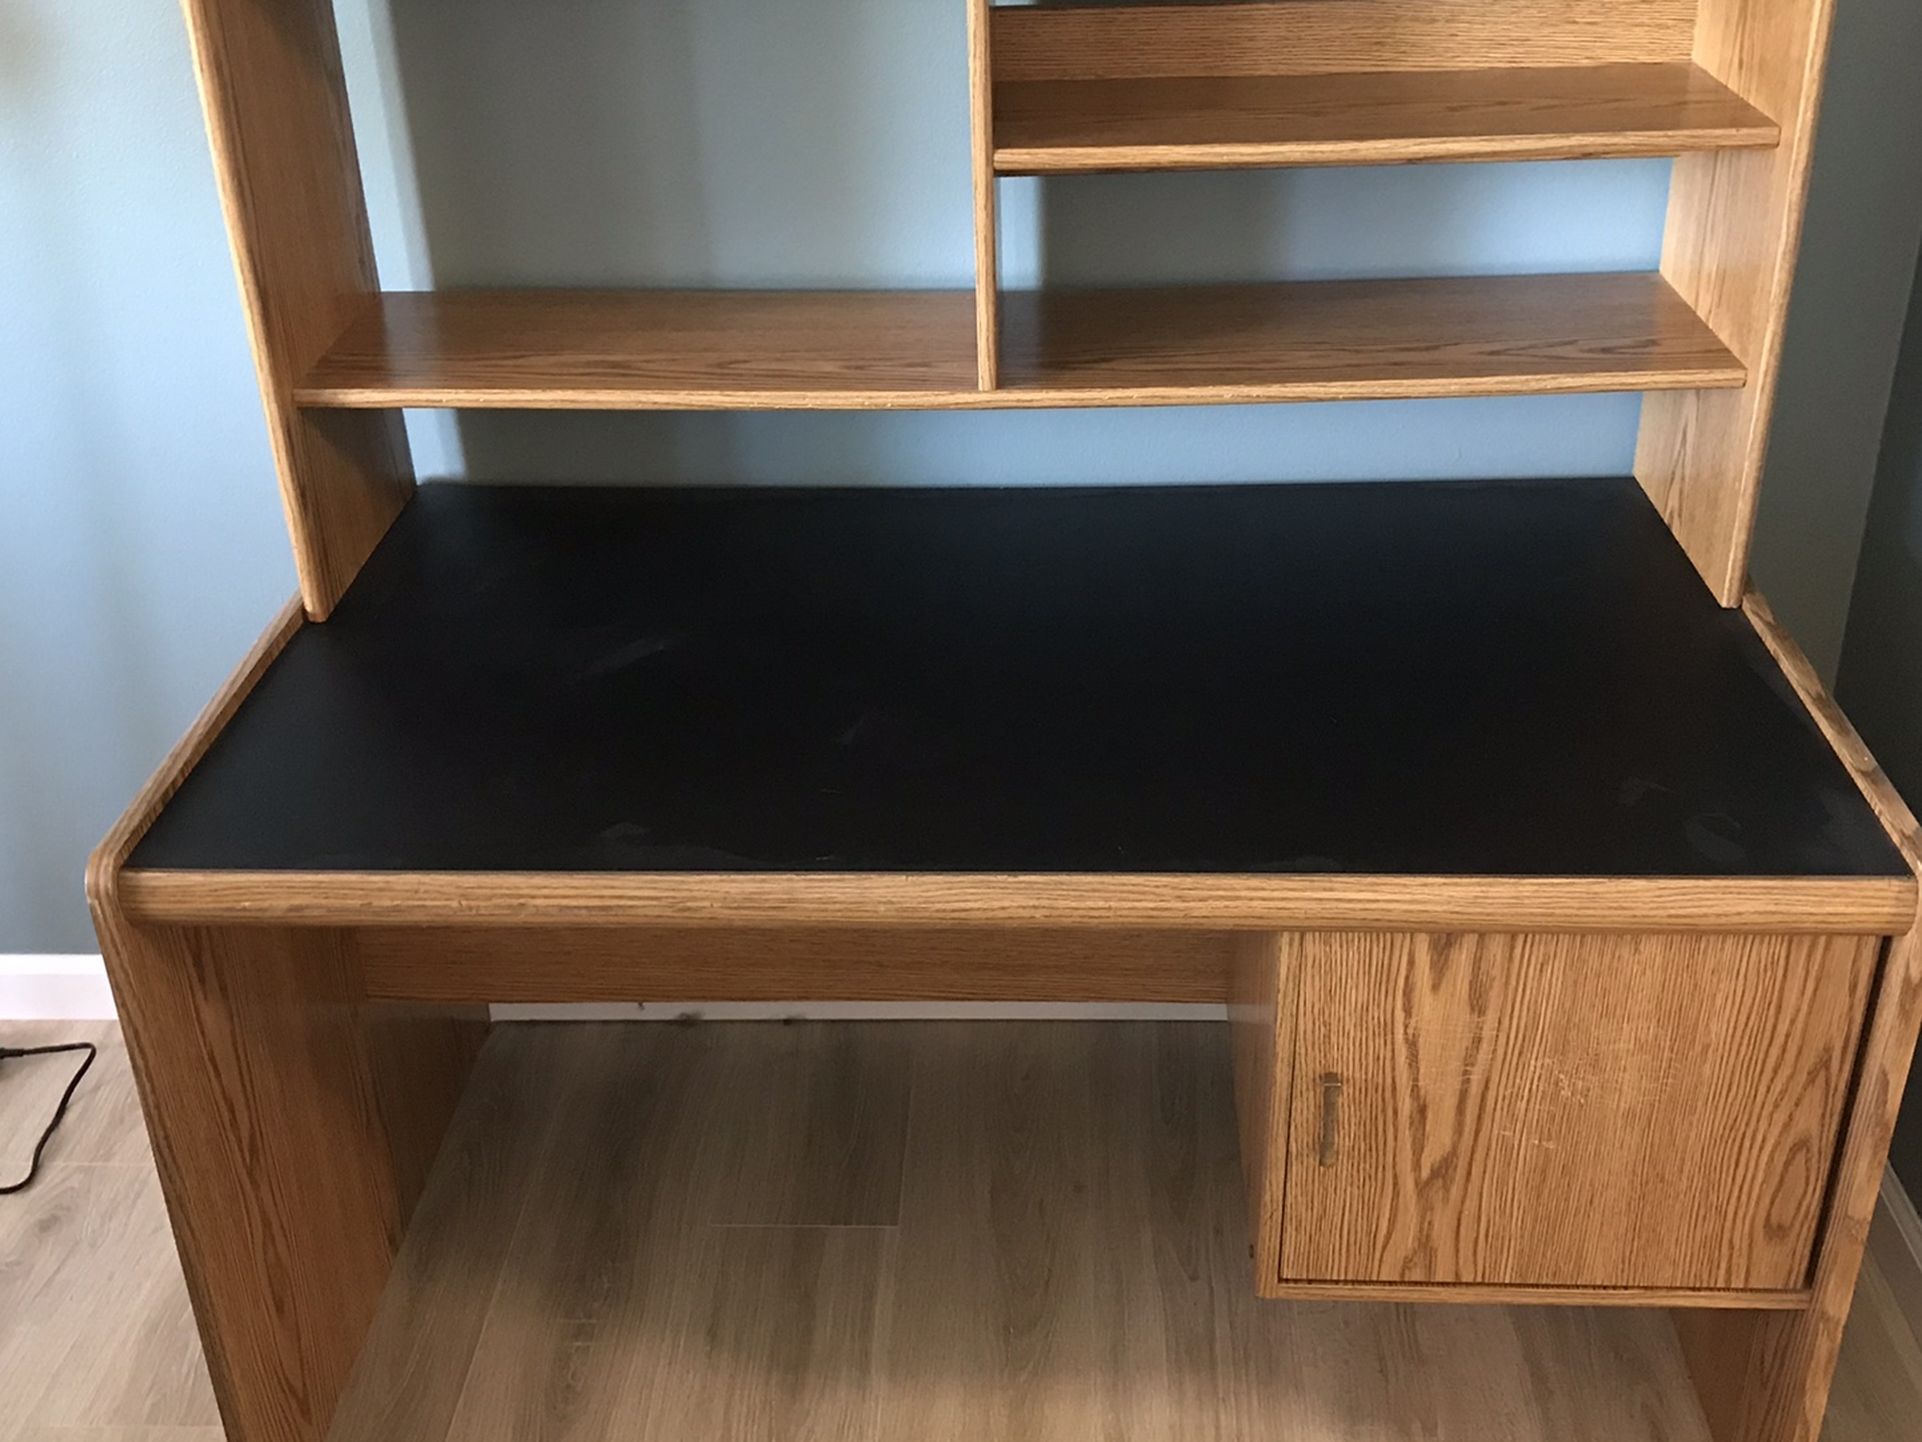 Irs Still Available ! 2 Piece Desk And Shelf Unit.